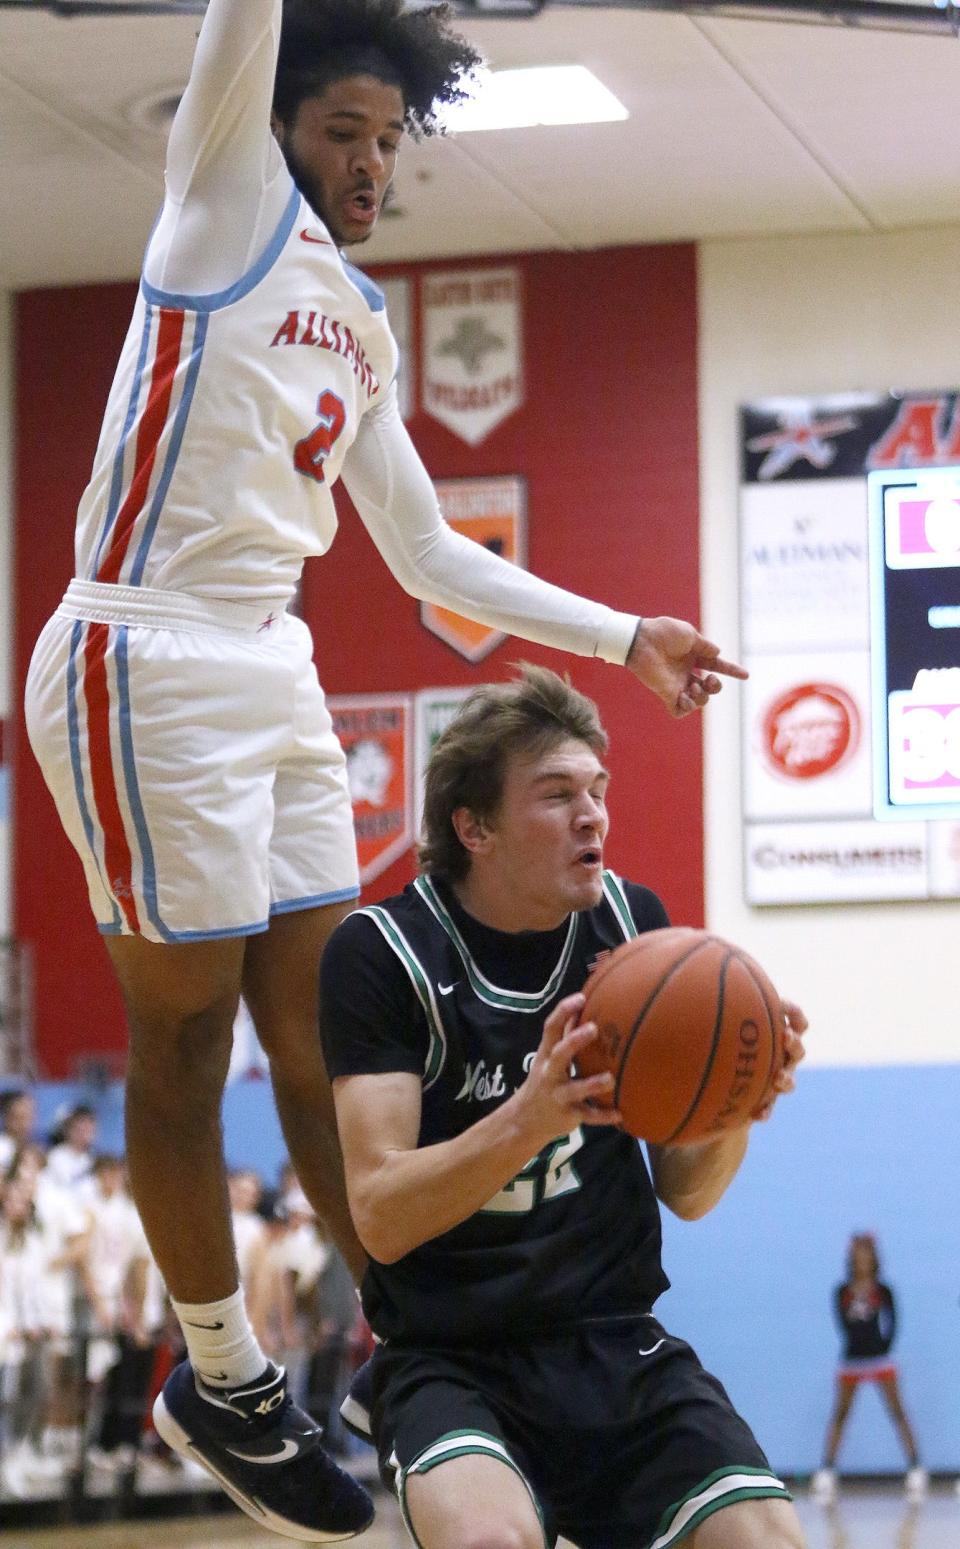 Alliance's K'Vaughn Davis, left, leaps, West Branch's Dru DeShields with the ball during action at Alliance High School Tuesday, January 18, 2022.